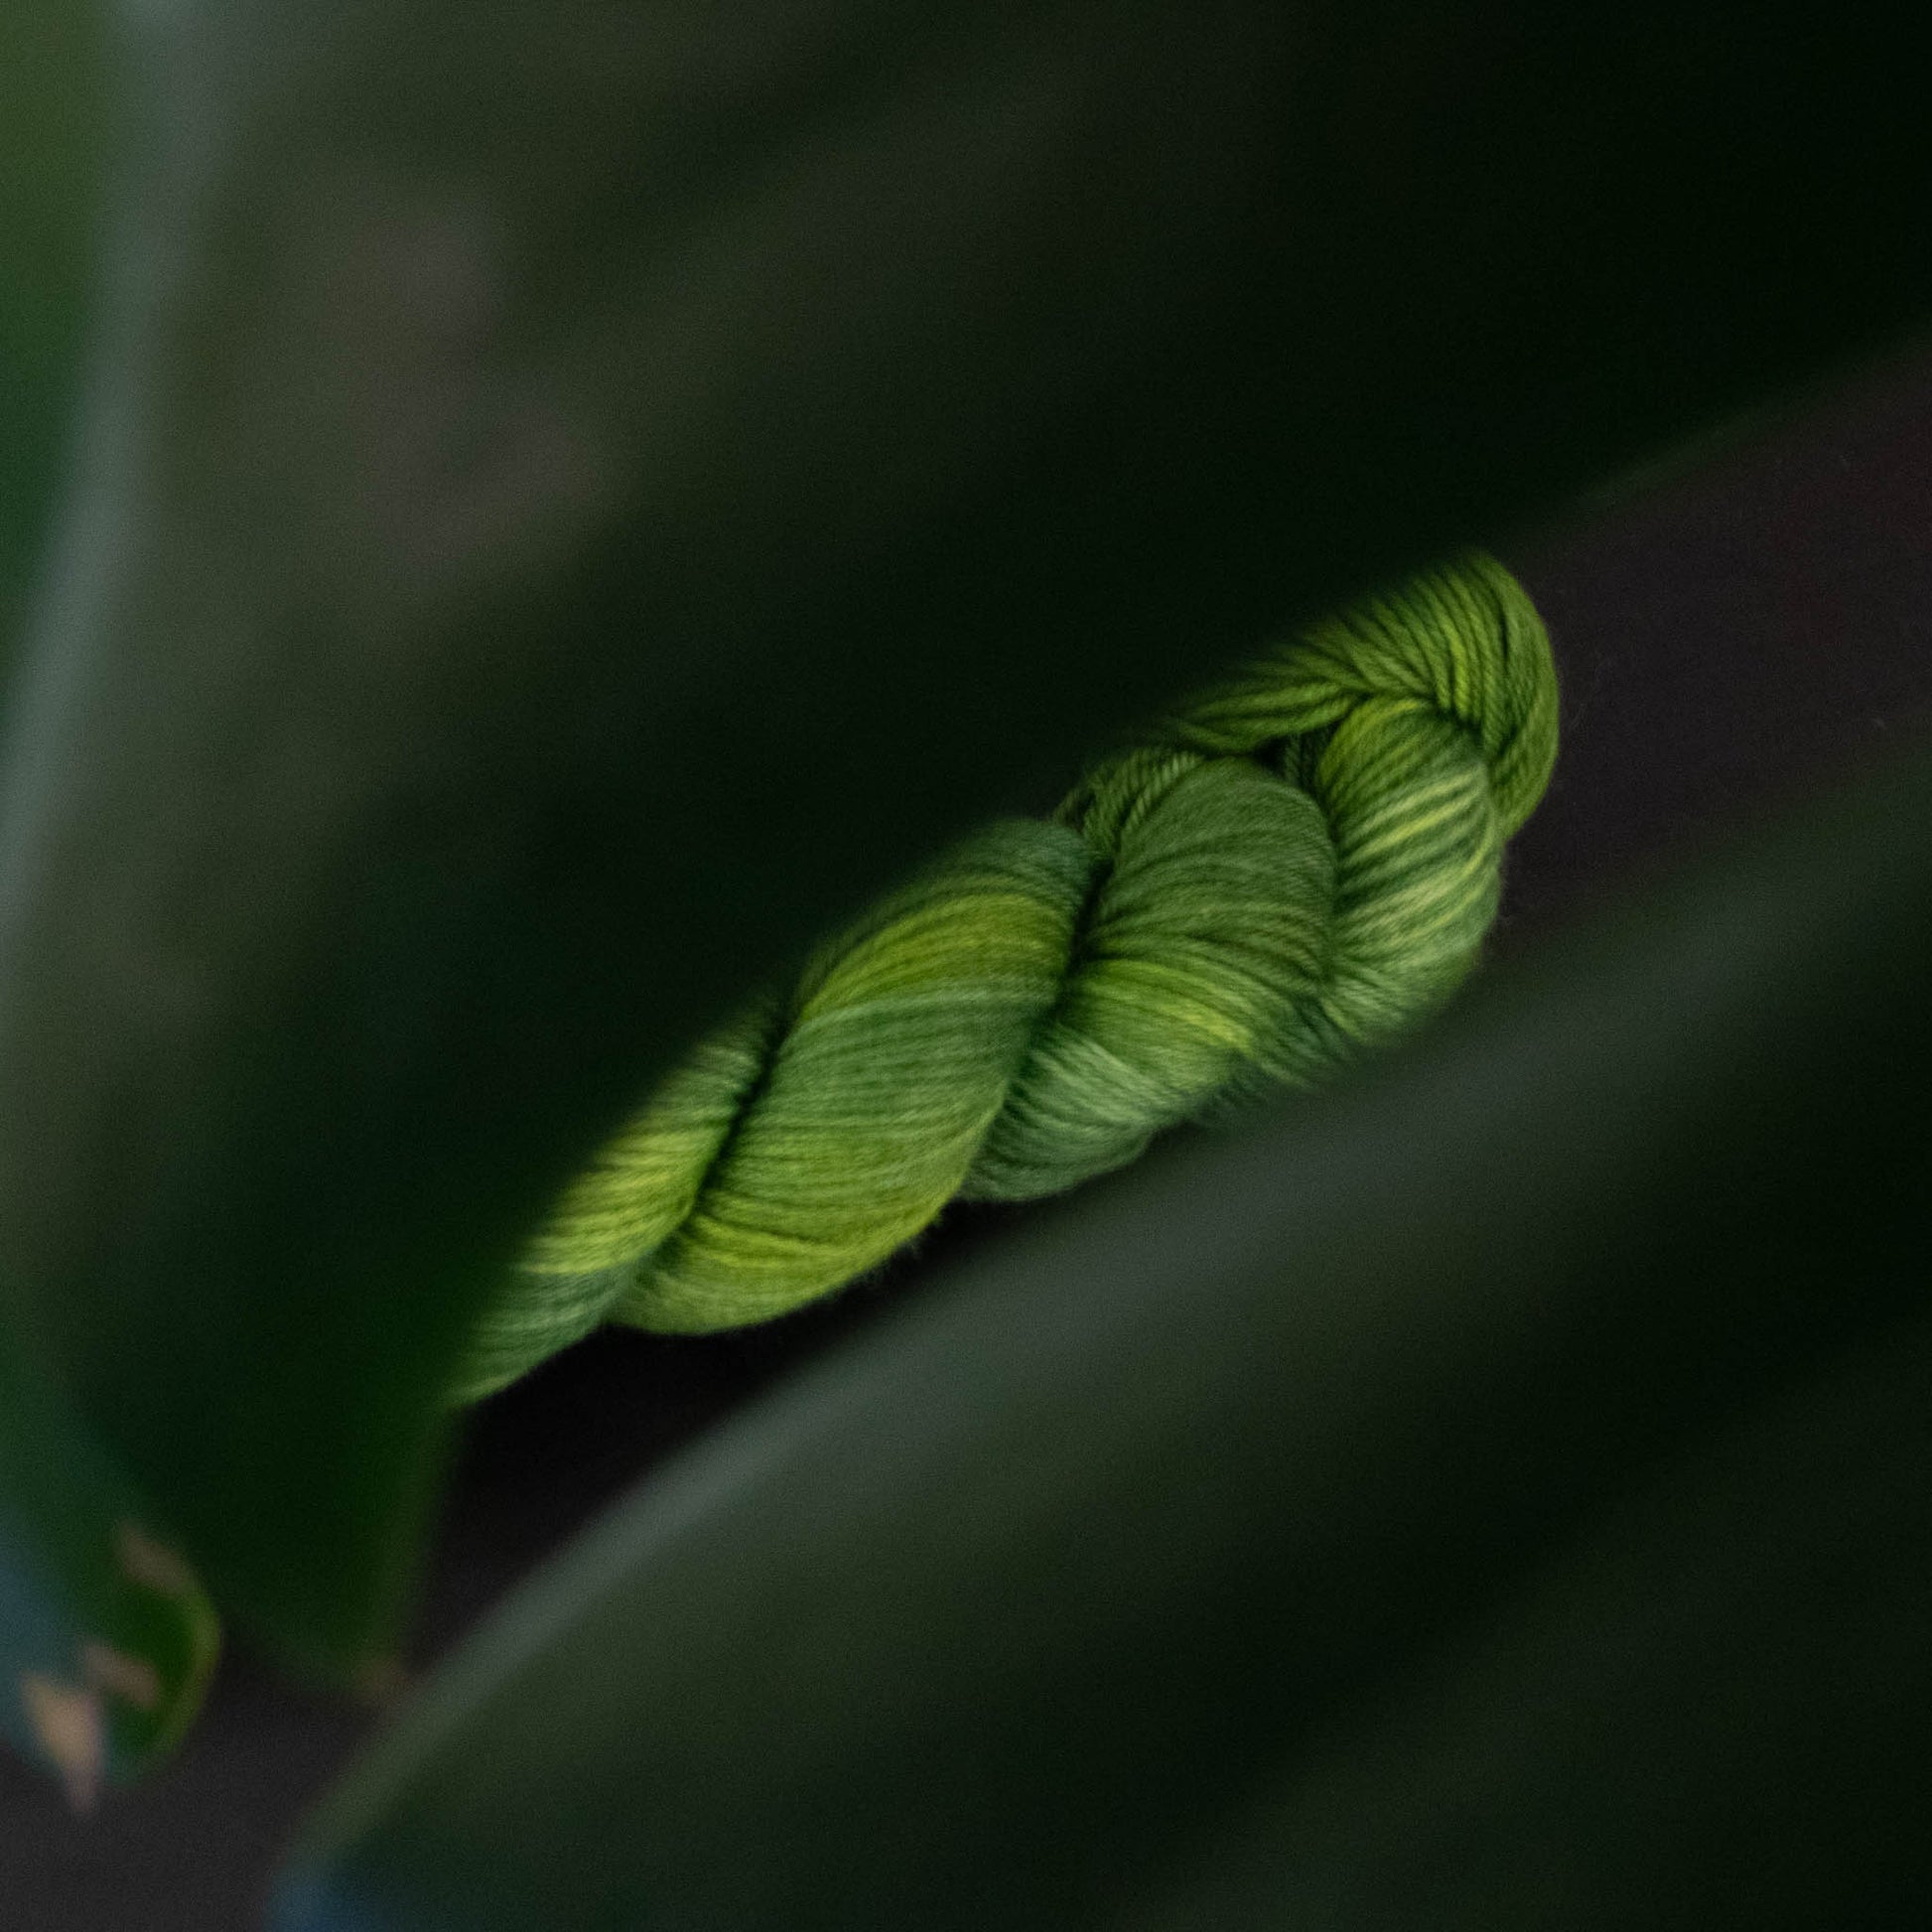 A skein of bright green yarn viewed behind the leaves of a plant.